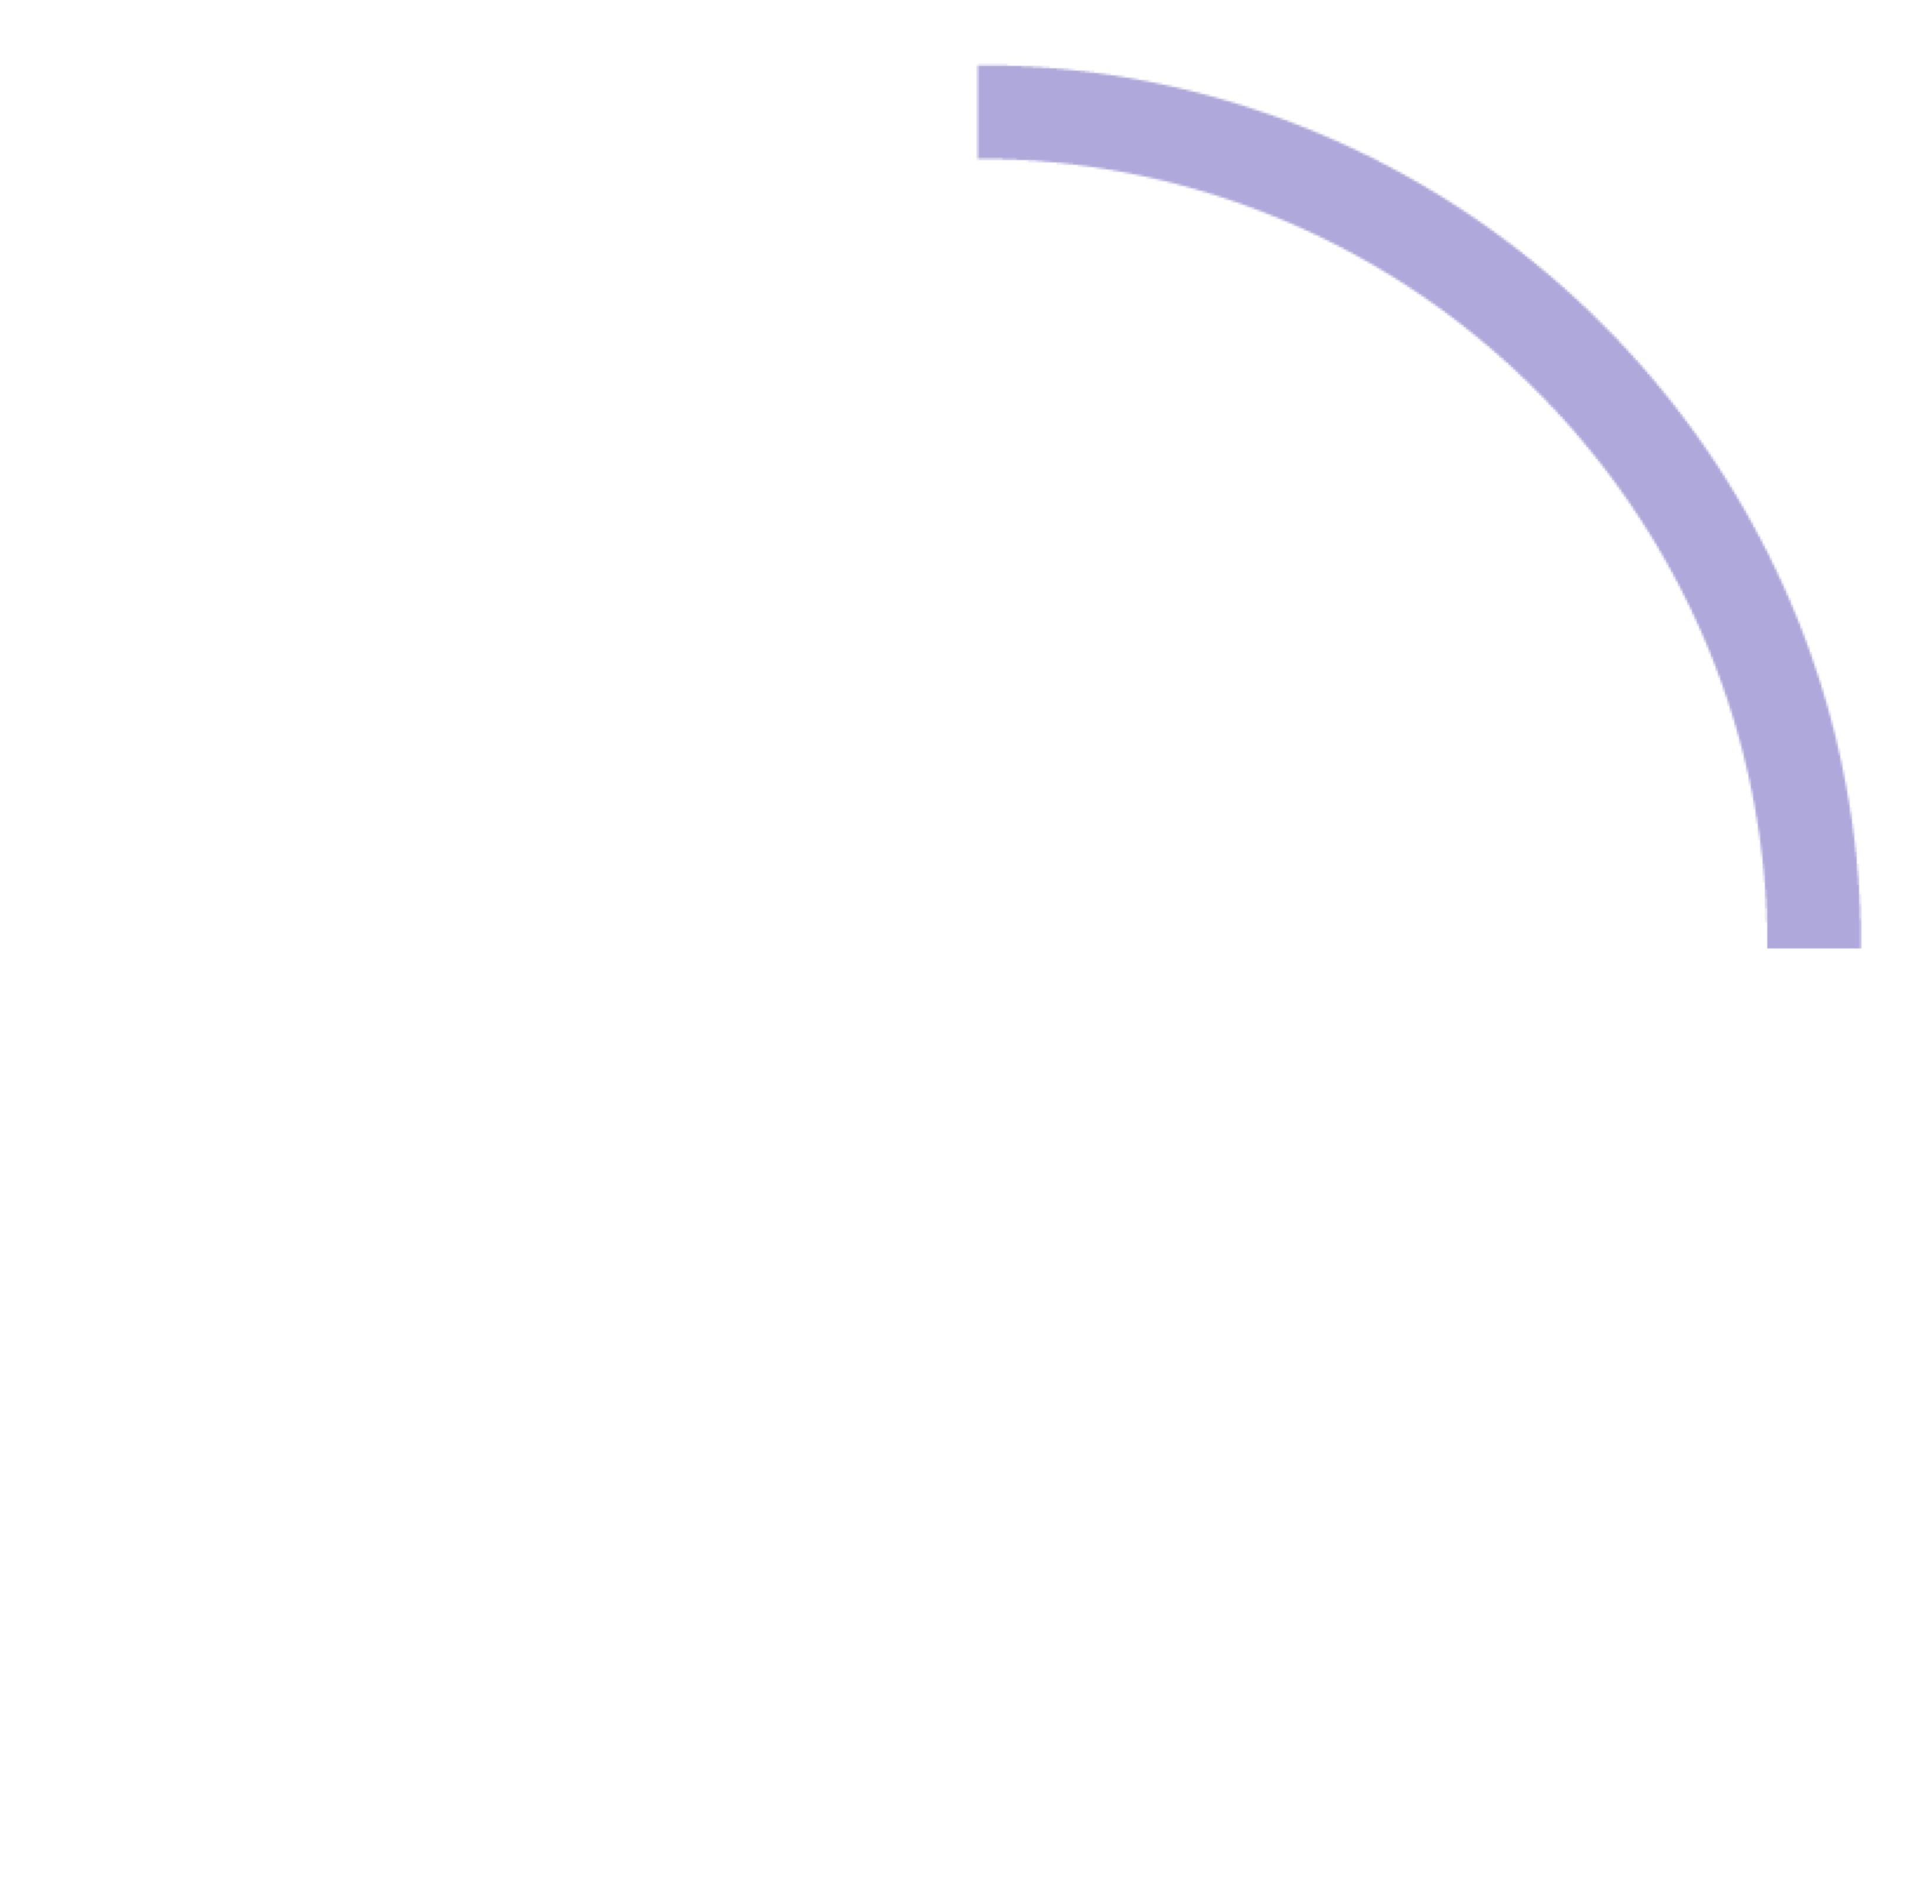 A circular icon with a shield in the center representing OneTrust Privacy and Data Governance.